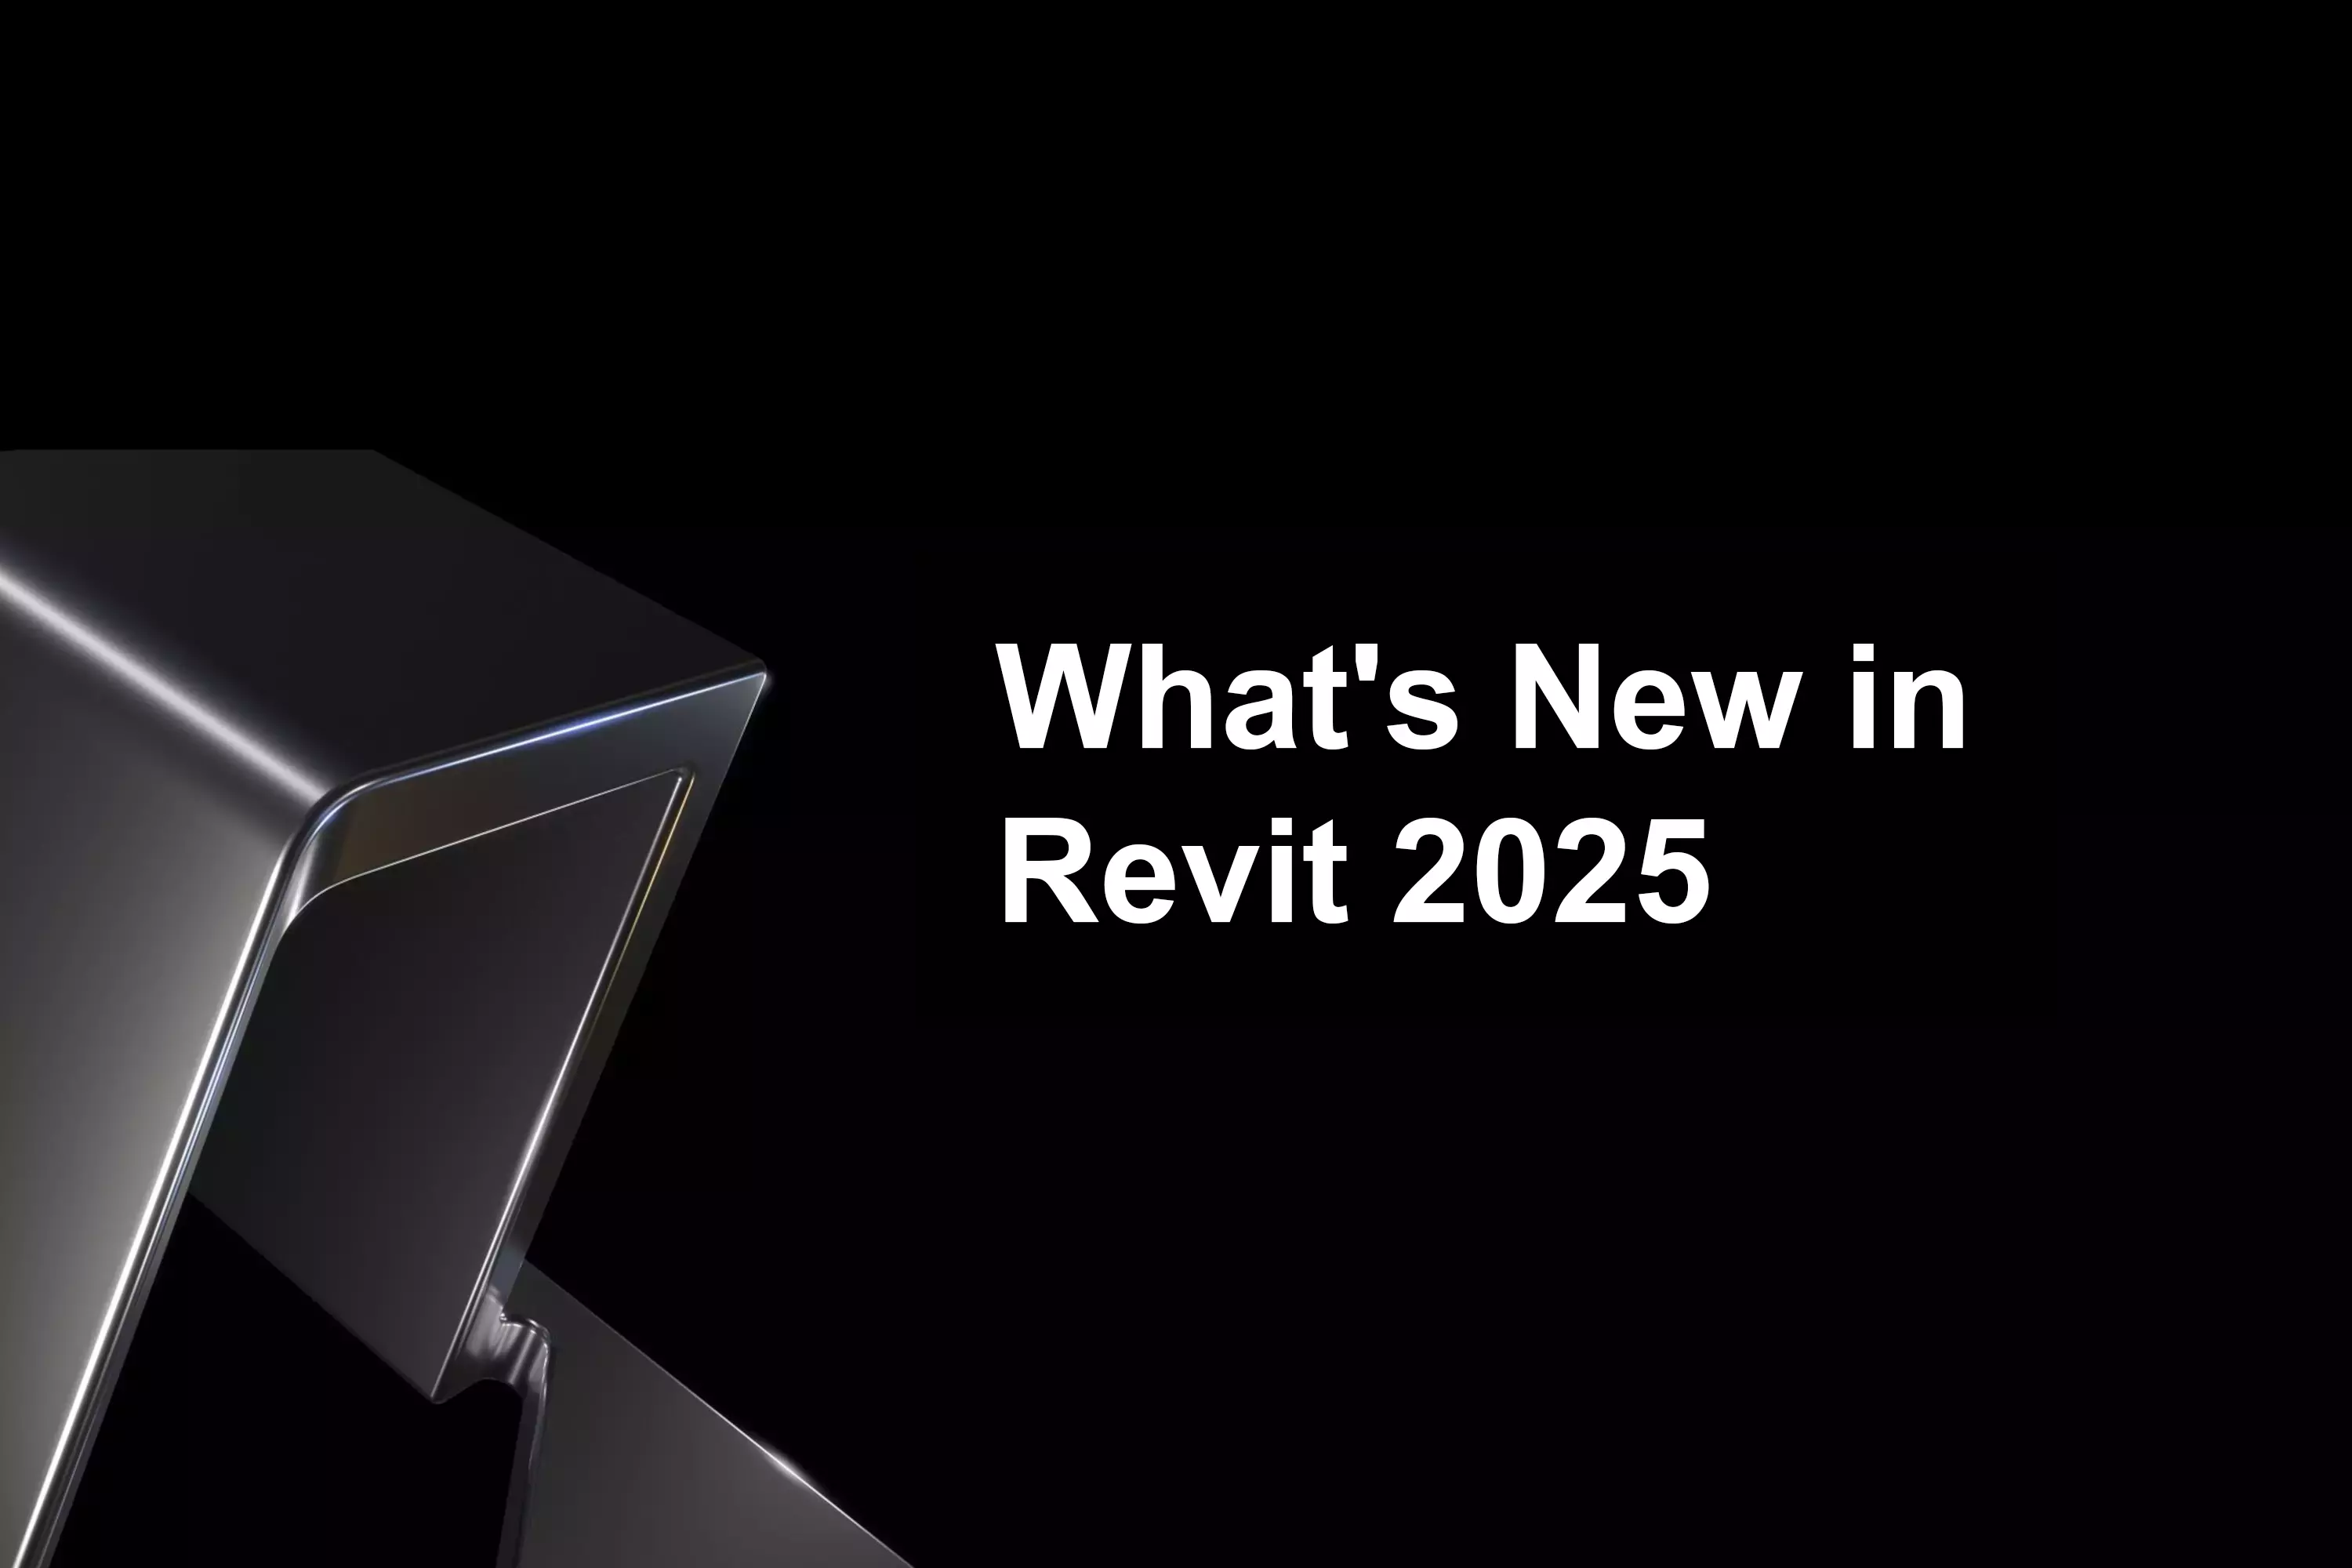 What's new in Revit 2025